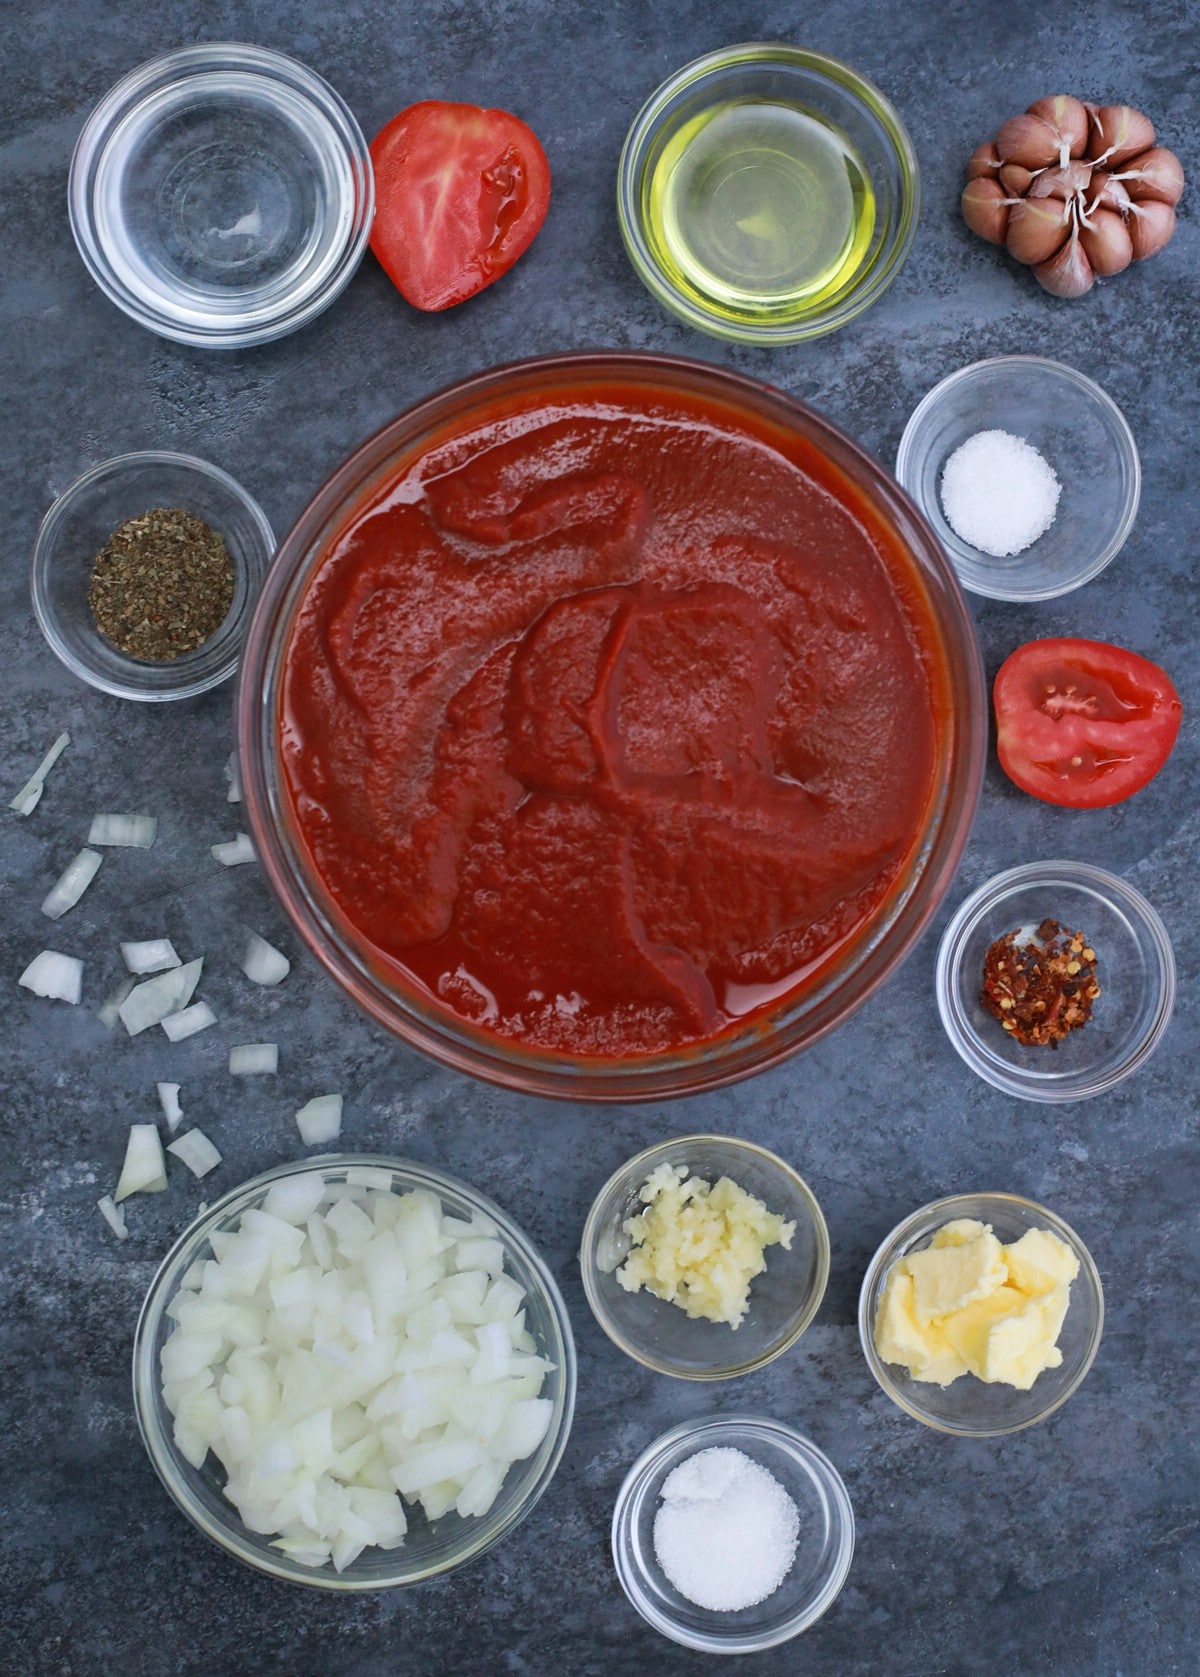 Ingredients for homemade pasta sauce in bowls on blue table